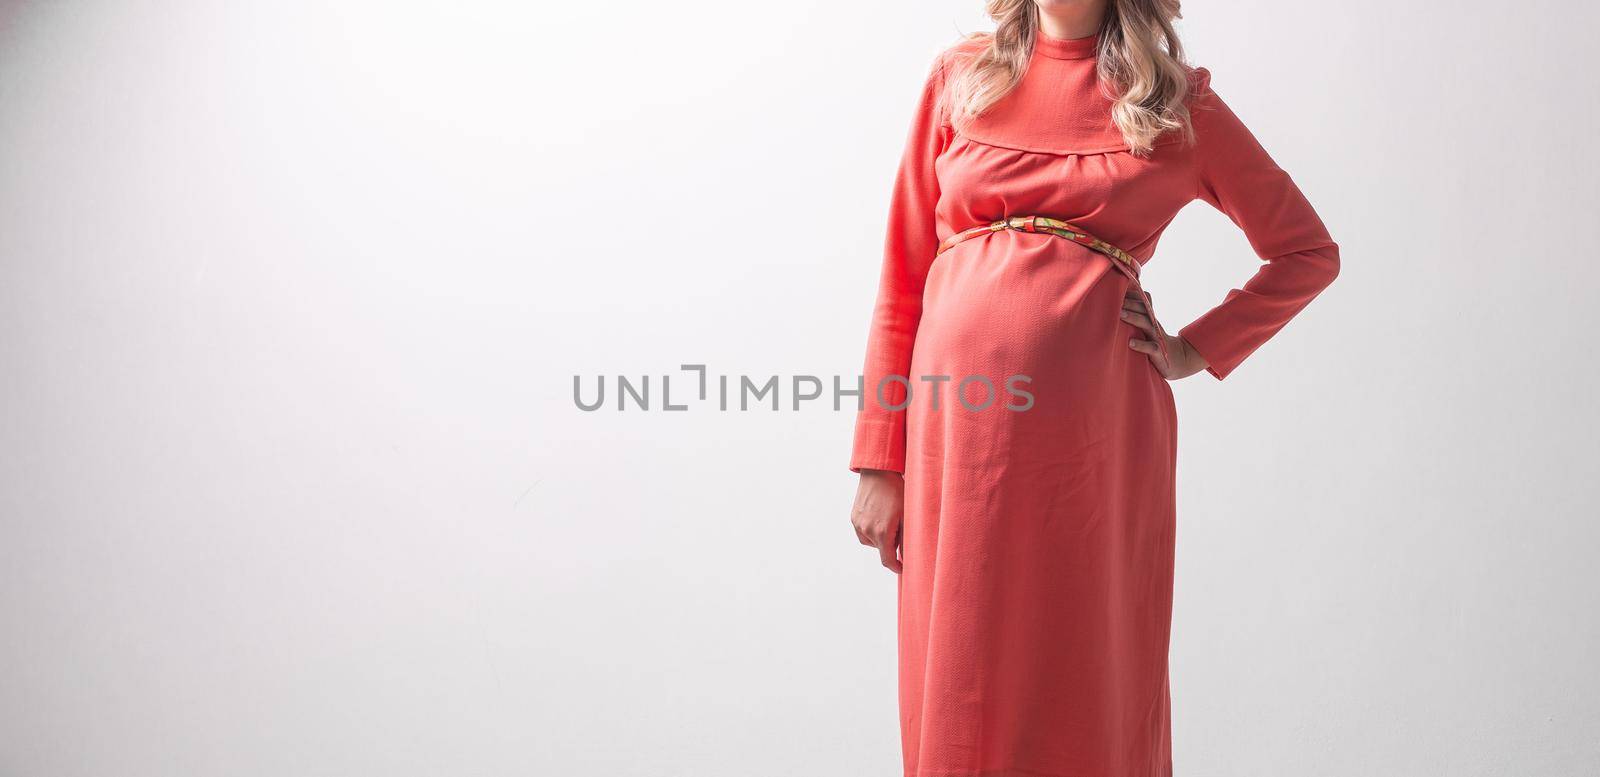 Pregnant woman on white wall background